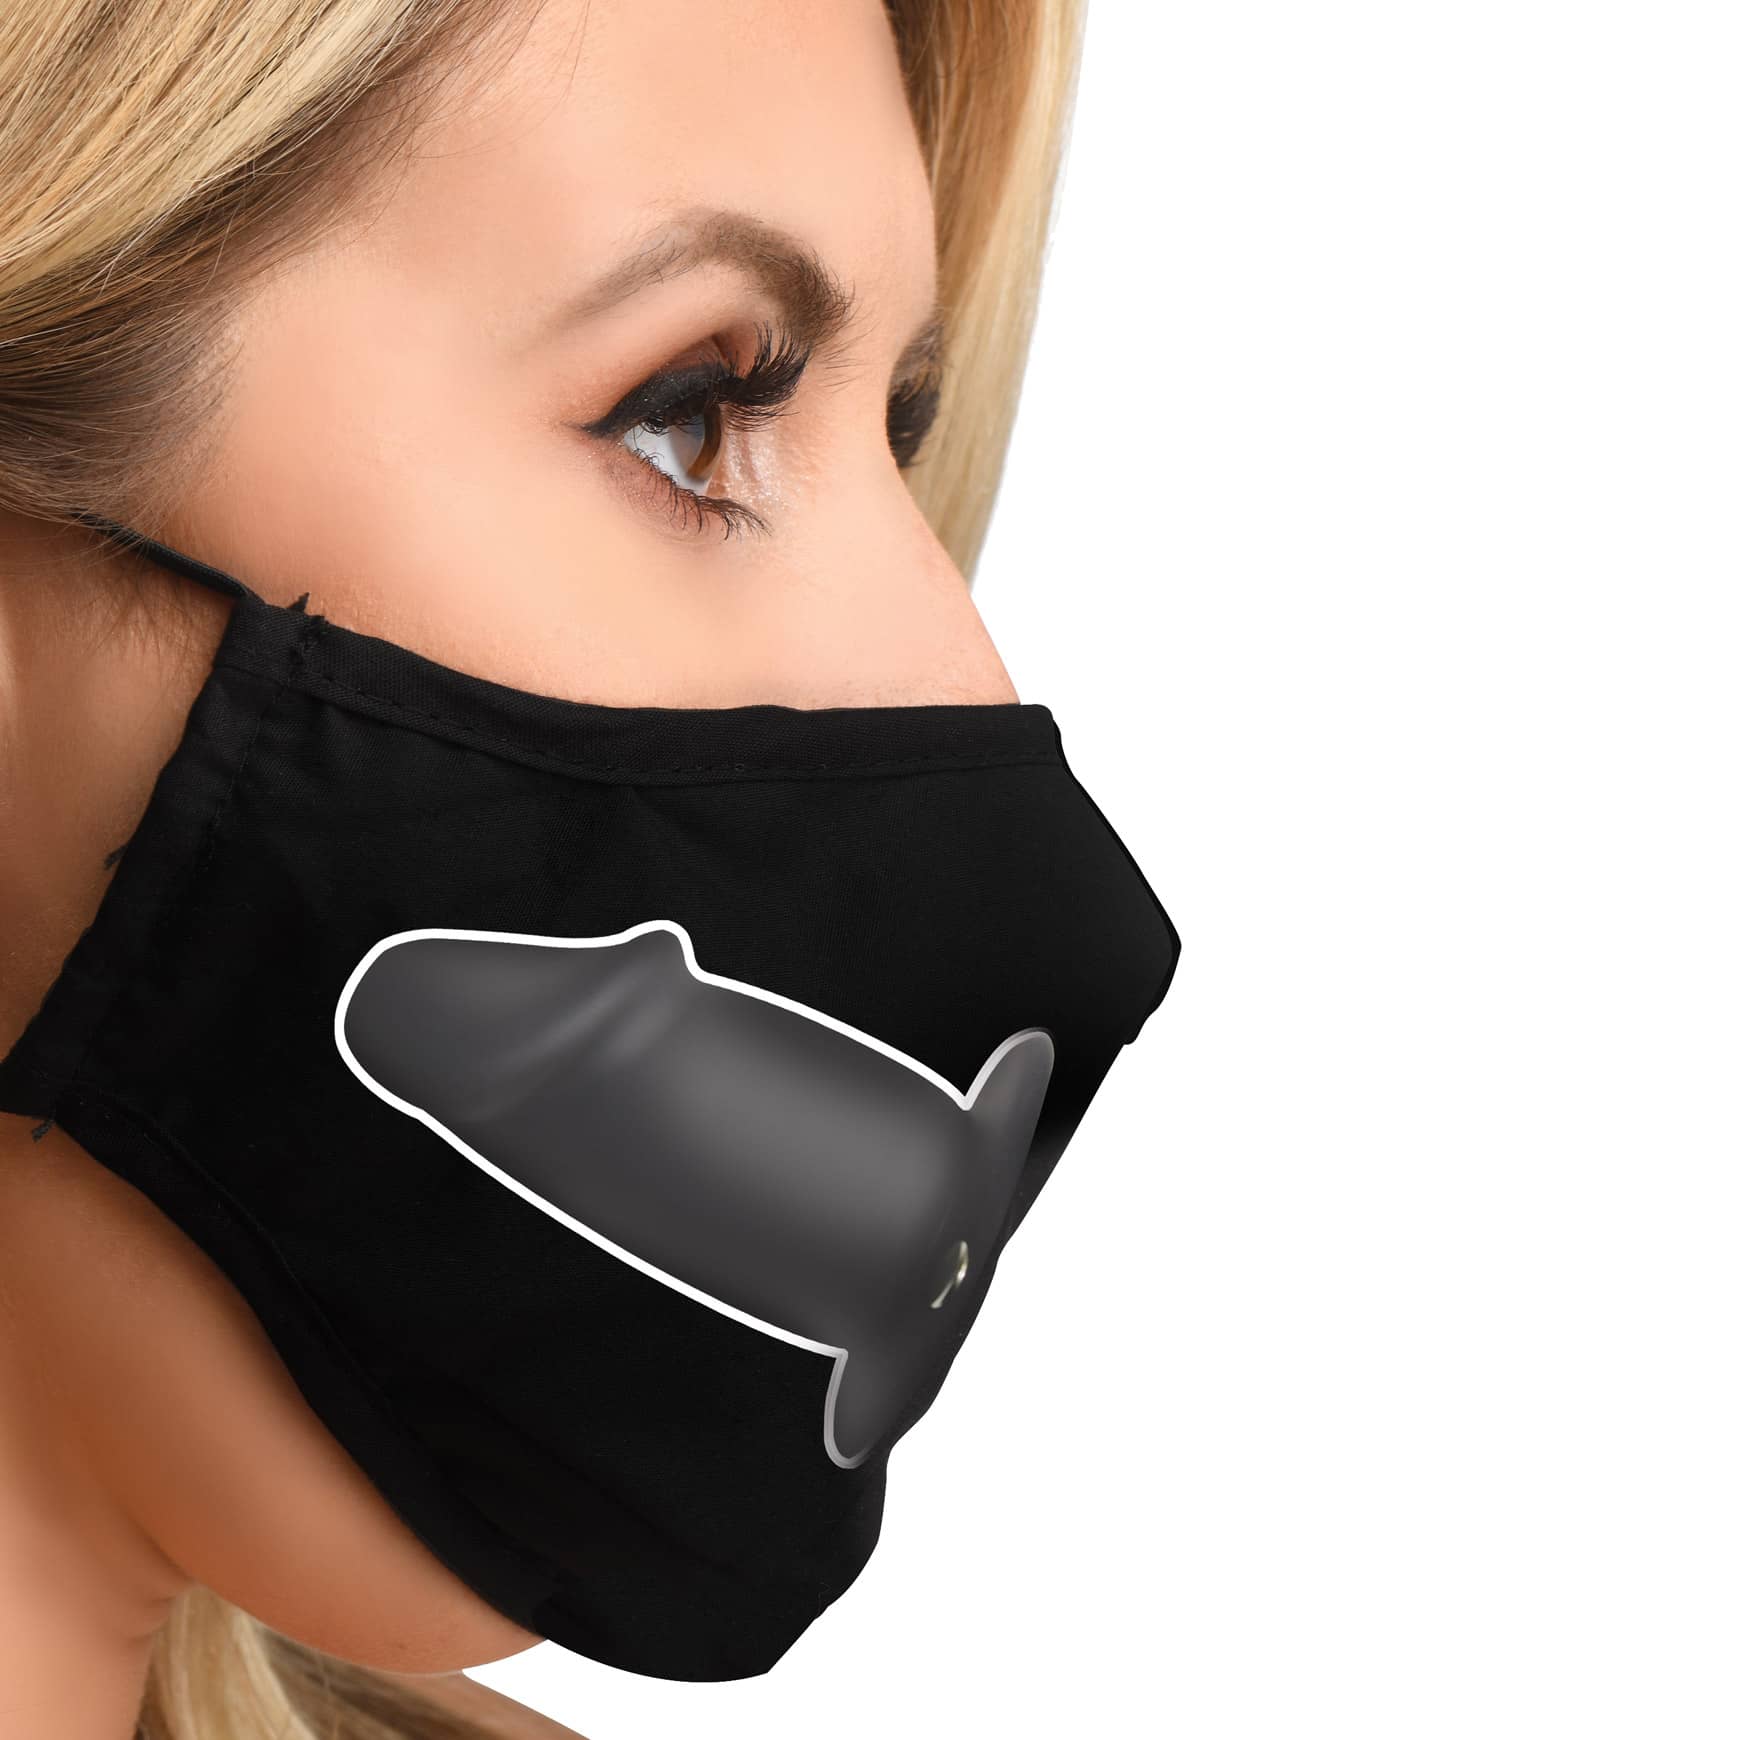 Mouth Full Dildo Face Mask – The Bdsm Toy Shop